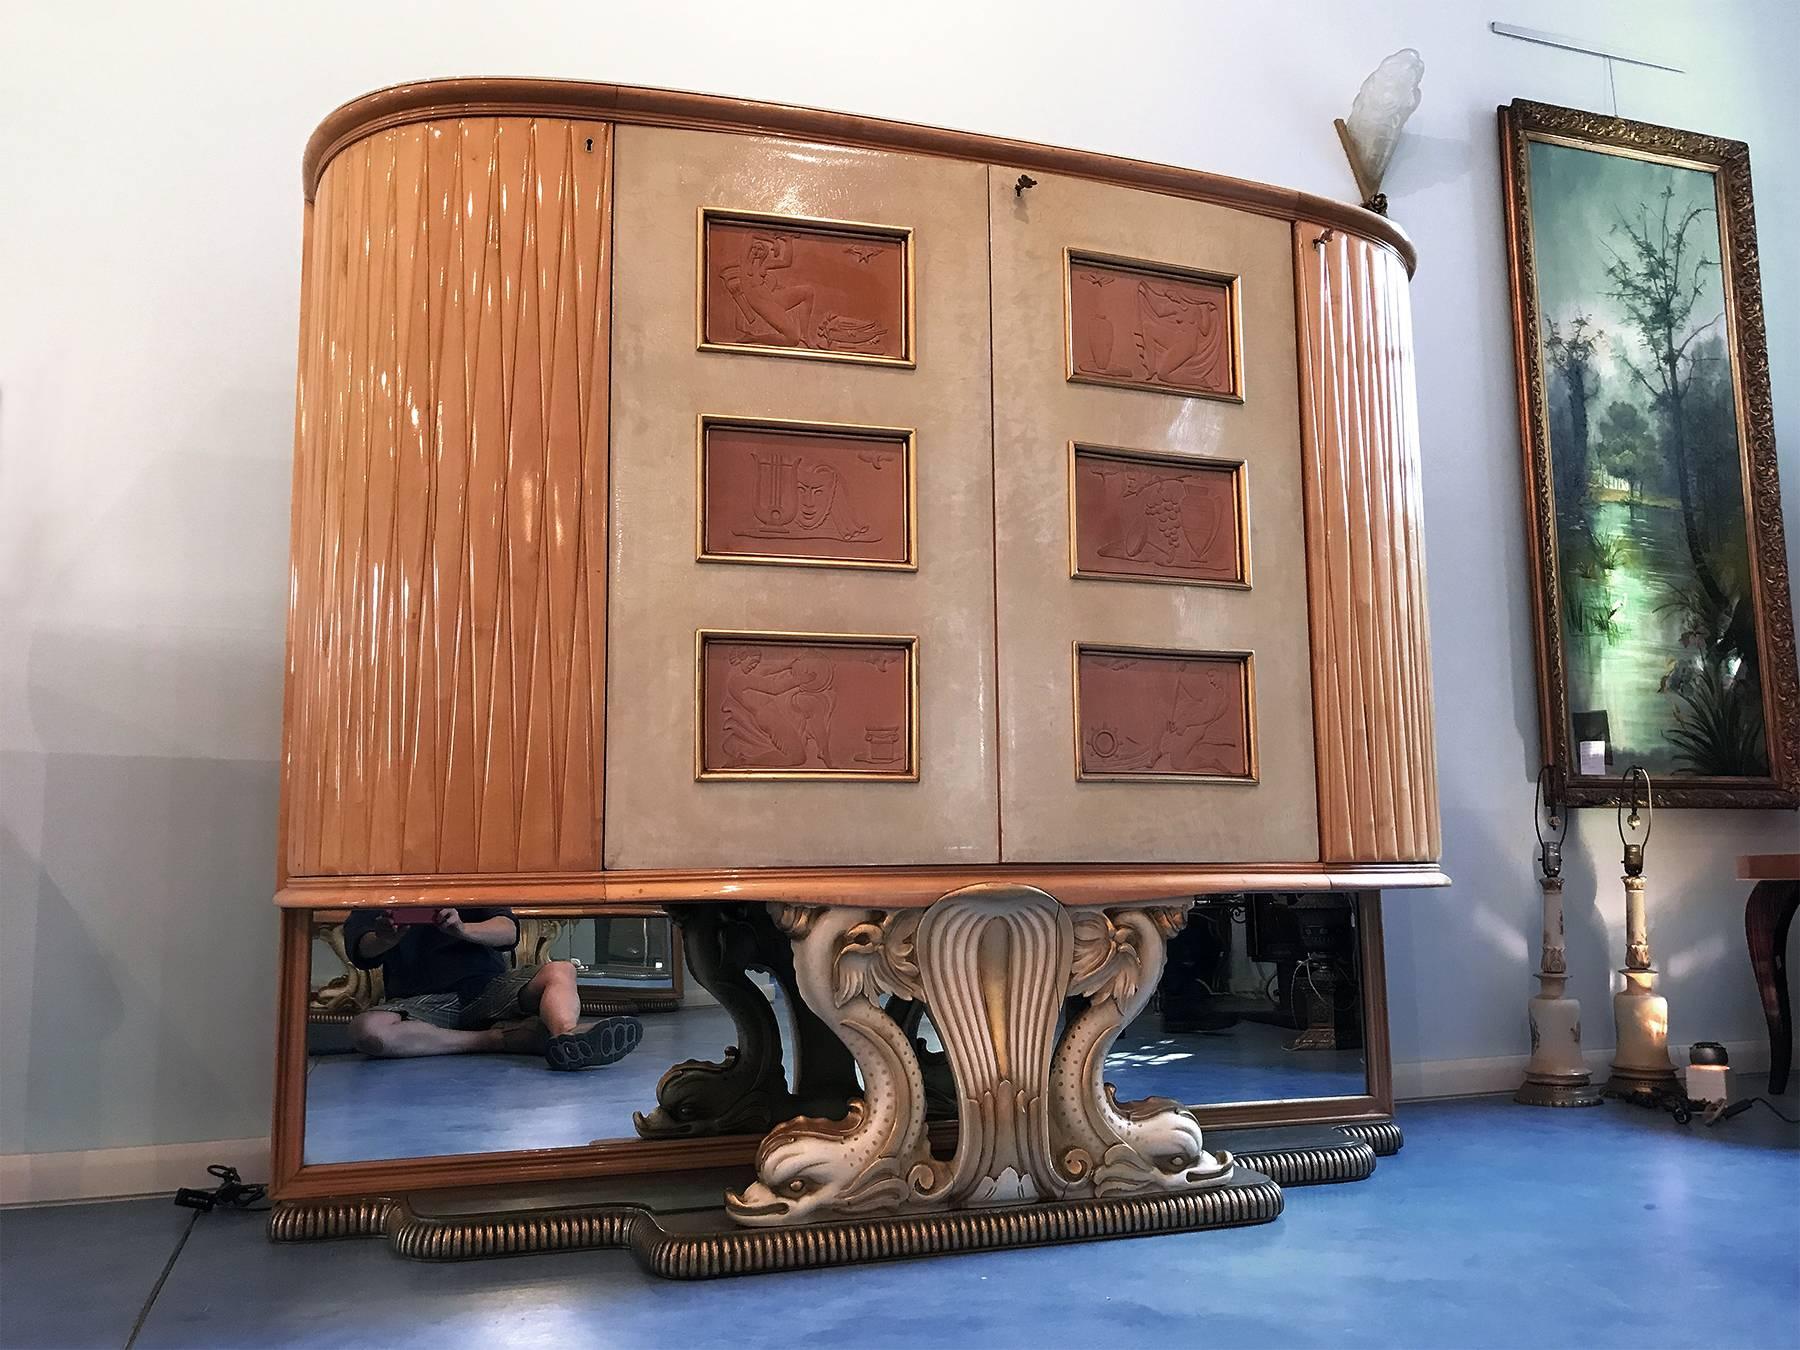 Spectacular wet bar cabinet in maple and parchment design attributed to Osvaldo Borsani in the 1940s.
On the parchment doors, there are wood sculptured figures of stylized women, luxury insides in maple that light up when opening the doors, glass